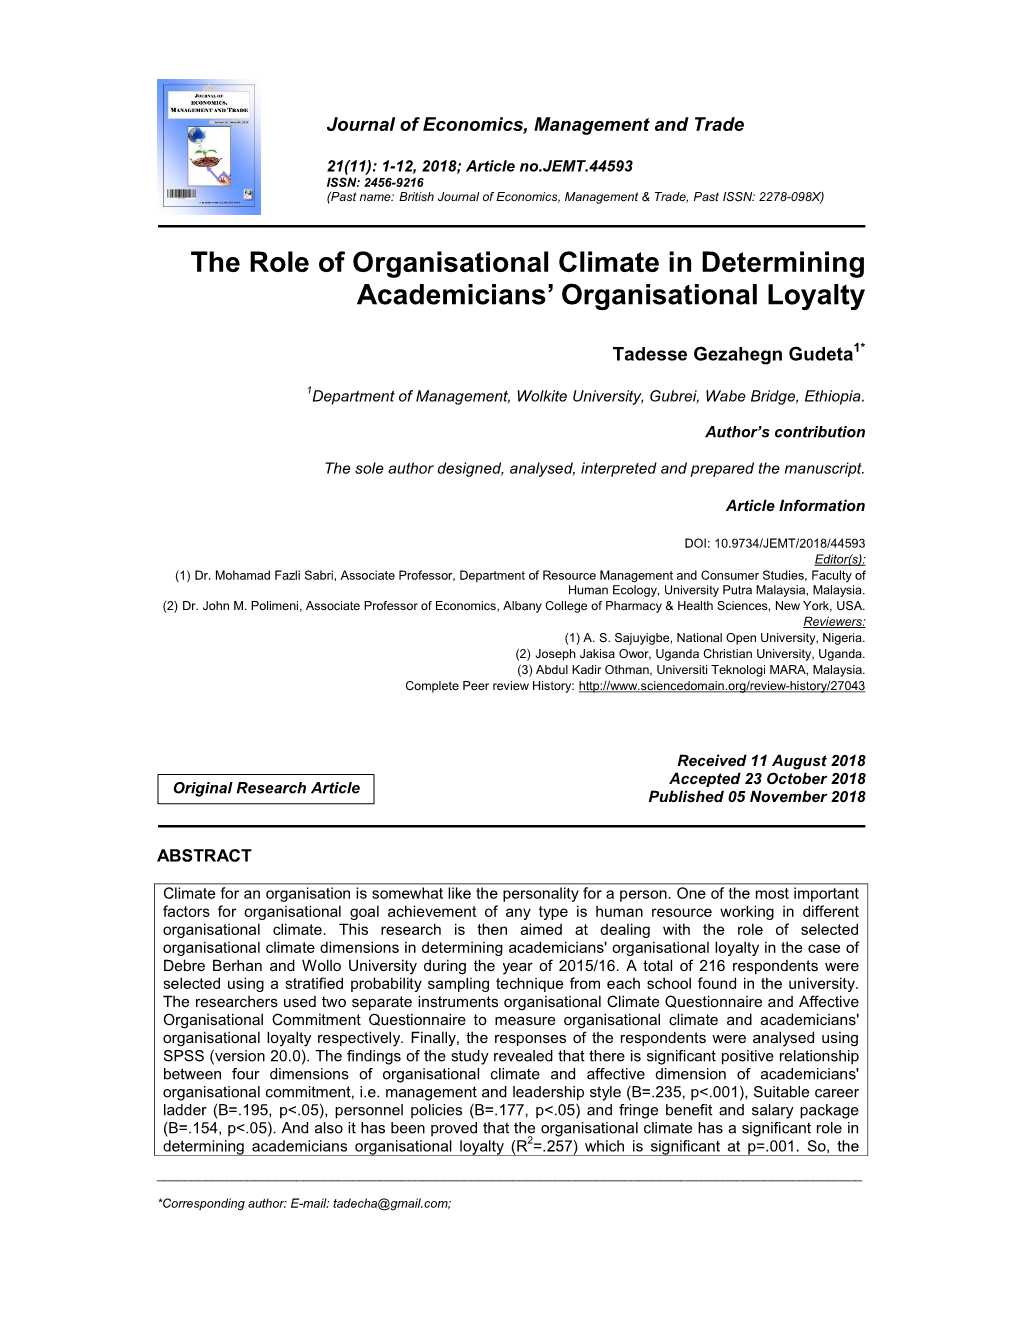 The Role of Organisational Climate in Determining Academicians’ Organisational Loyalty